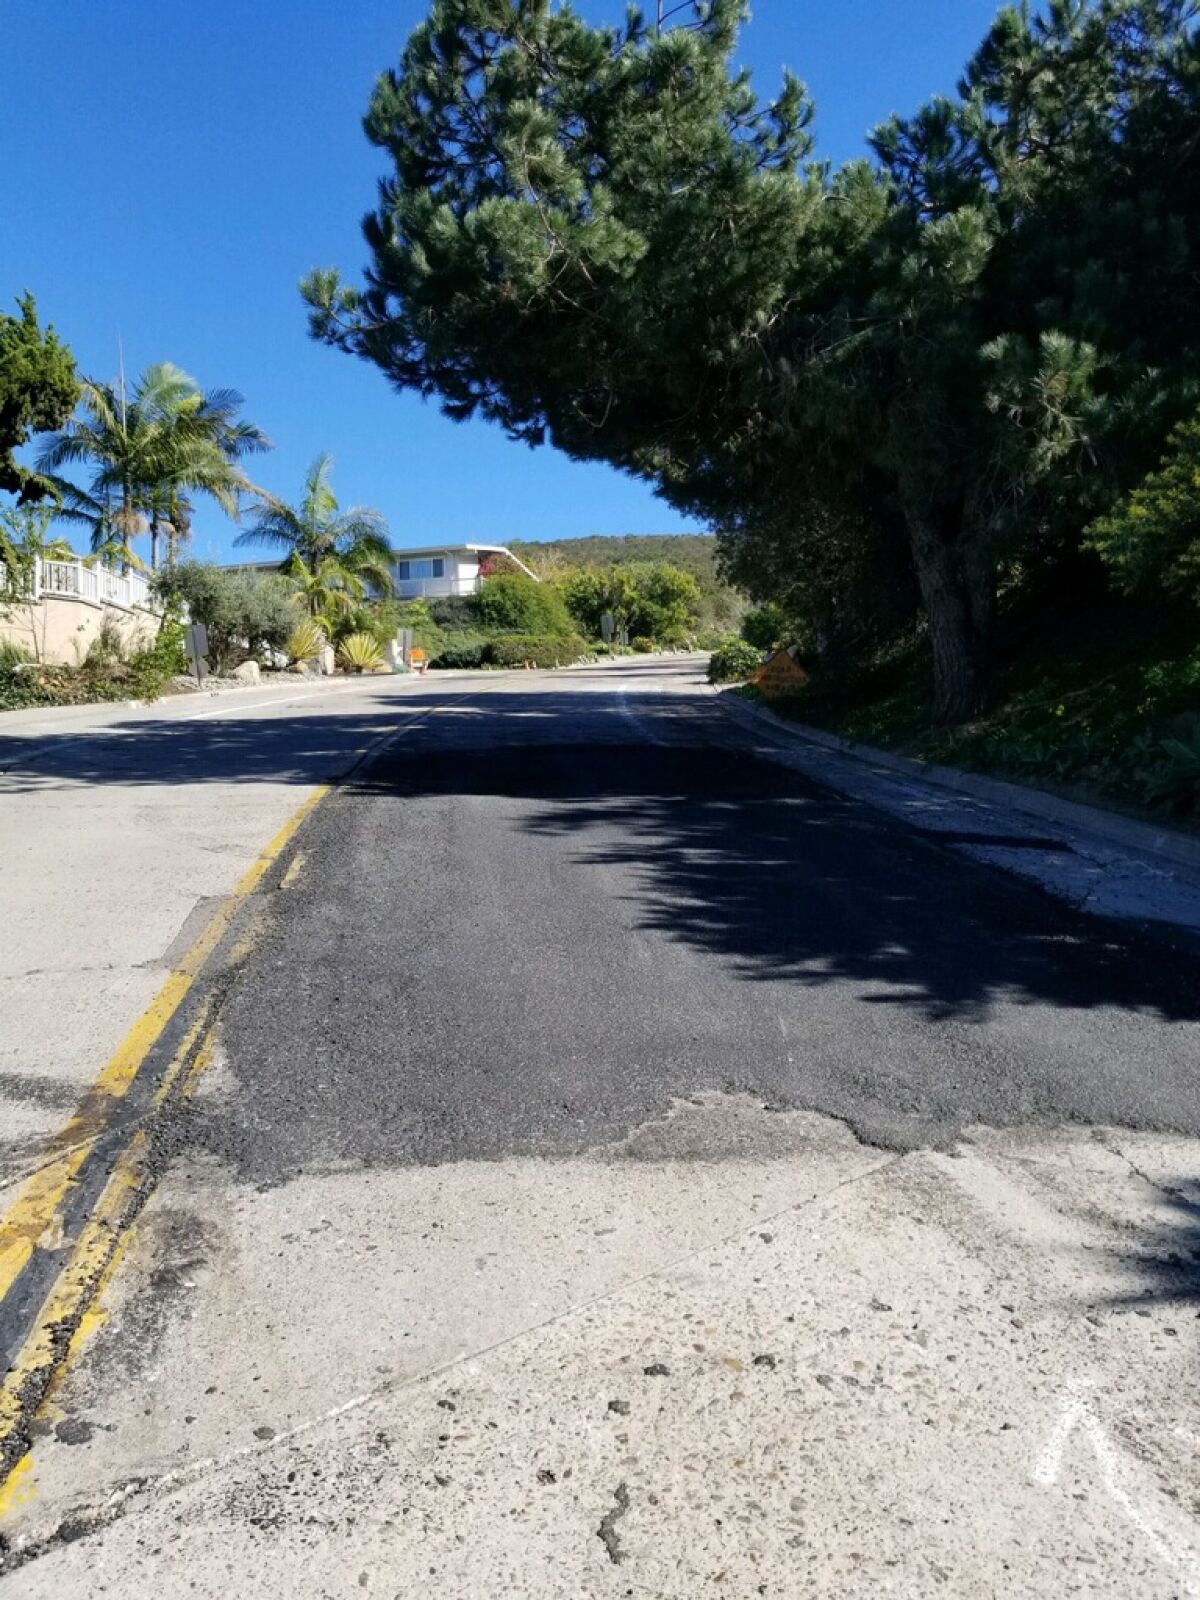 Via Capri at Rue Denise received a temporary asphalt patch after the concrete portion was deemed dangerous for driving.